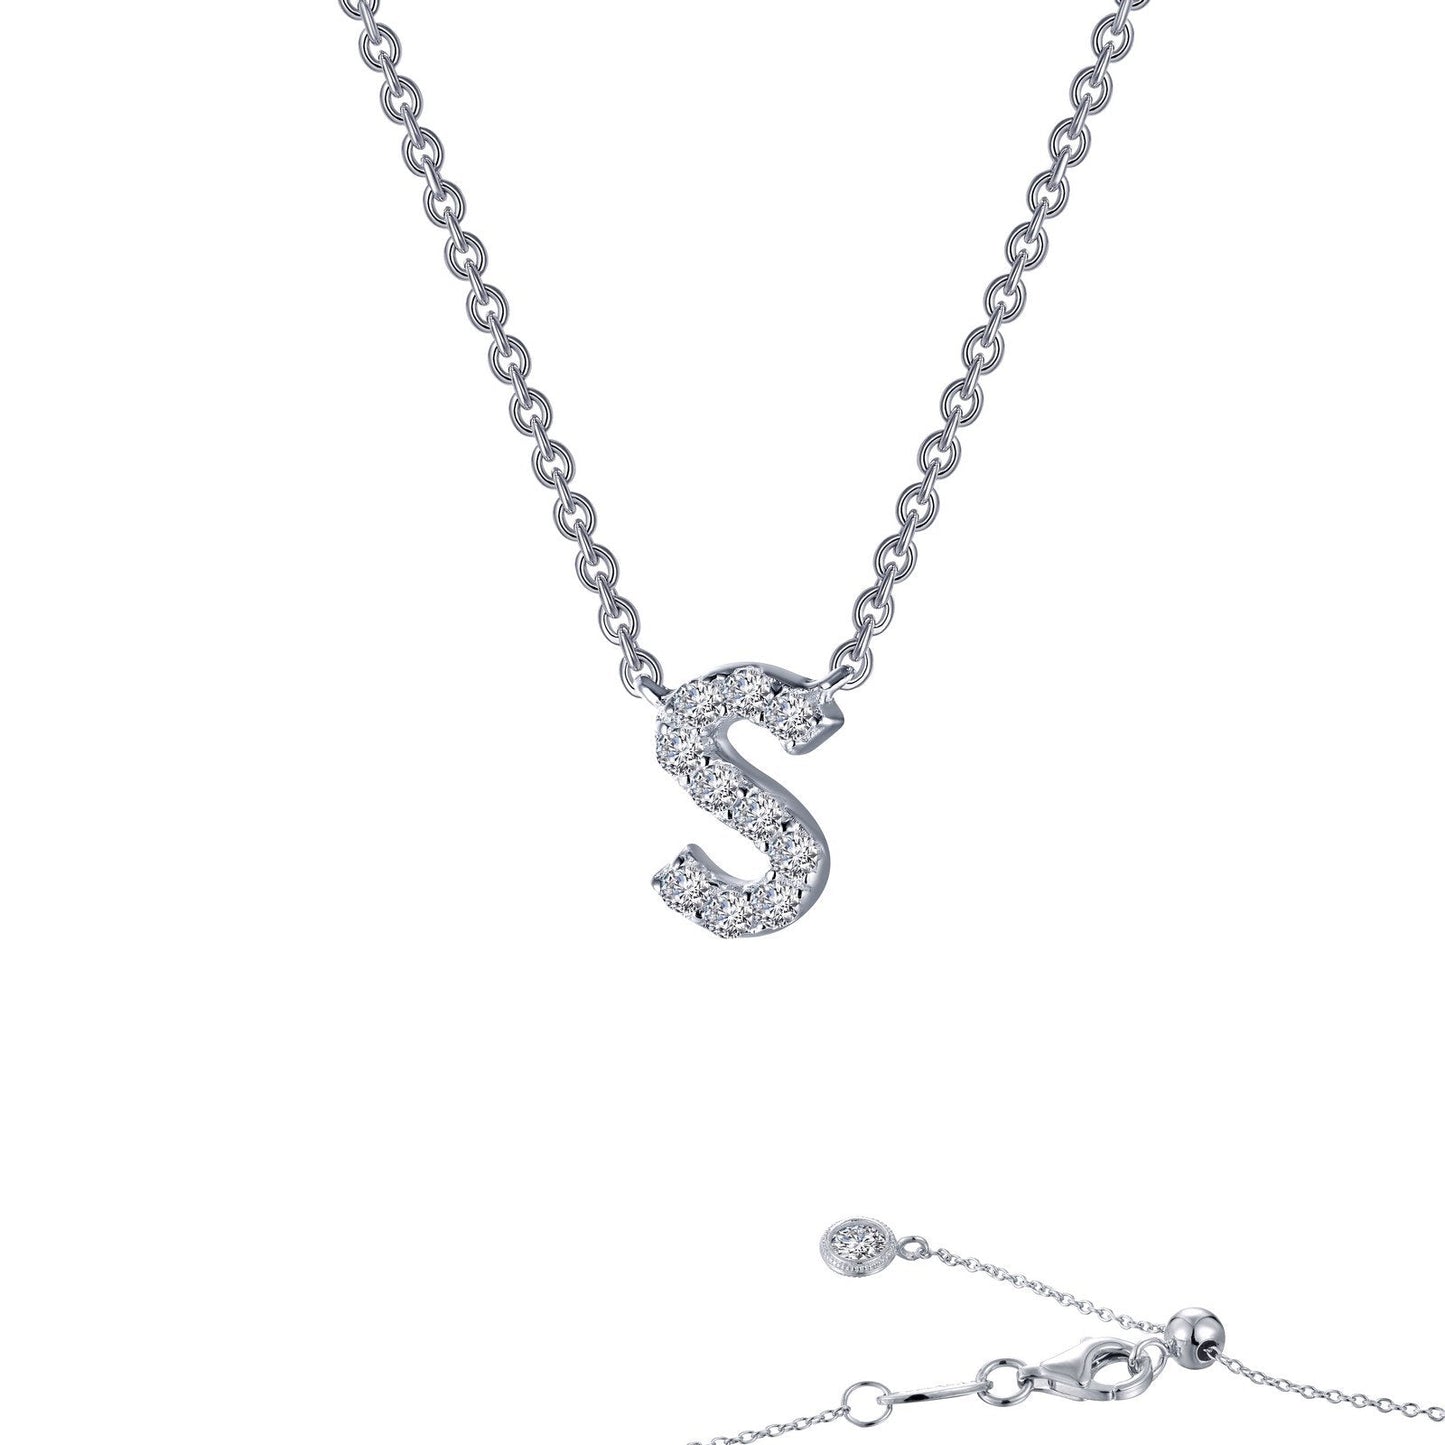 Load image into Gallery viewer, Lafonn Letter S Pendant Necklace Simulated Diamond NECKLACES Platinum 0.36 CTS Approx. 7.7mm (H) x 4.8mm (W)
